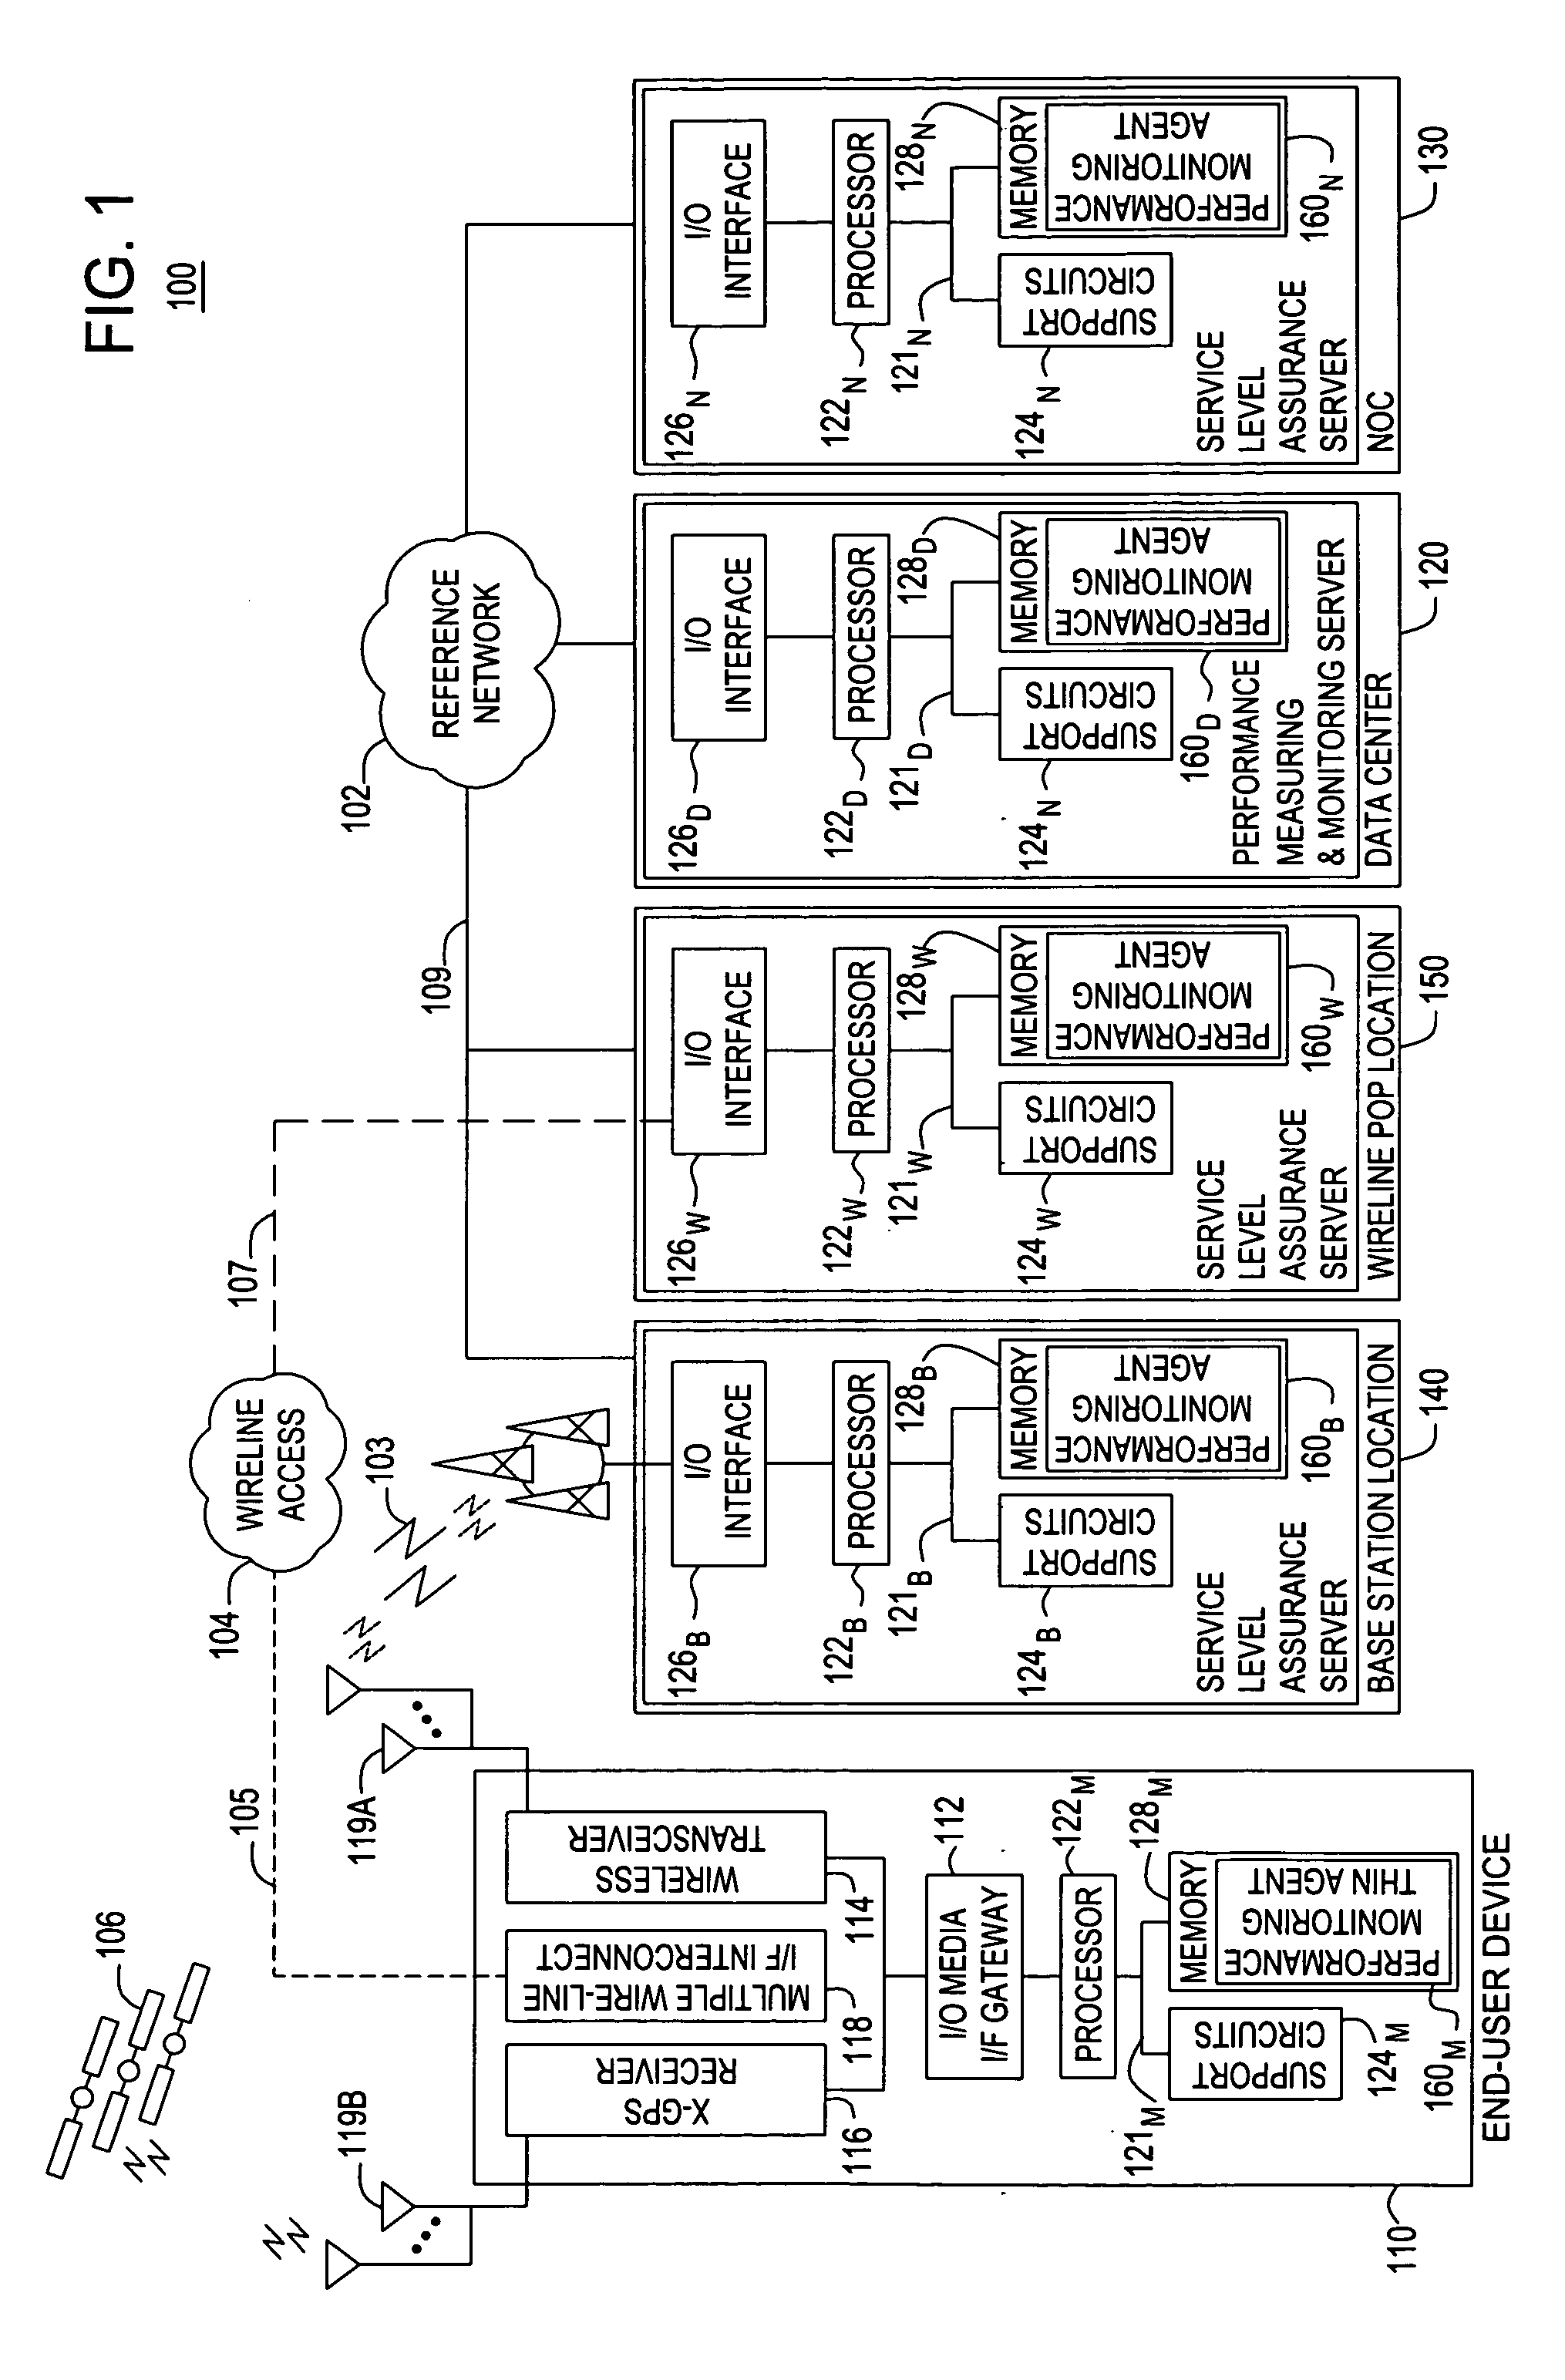 Method and apparatus for providing end-to-end high quality services based on performance characterizations of network conditions